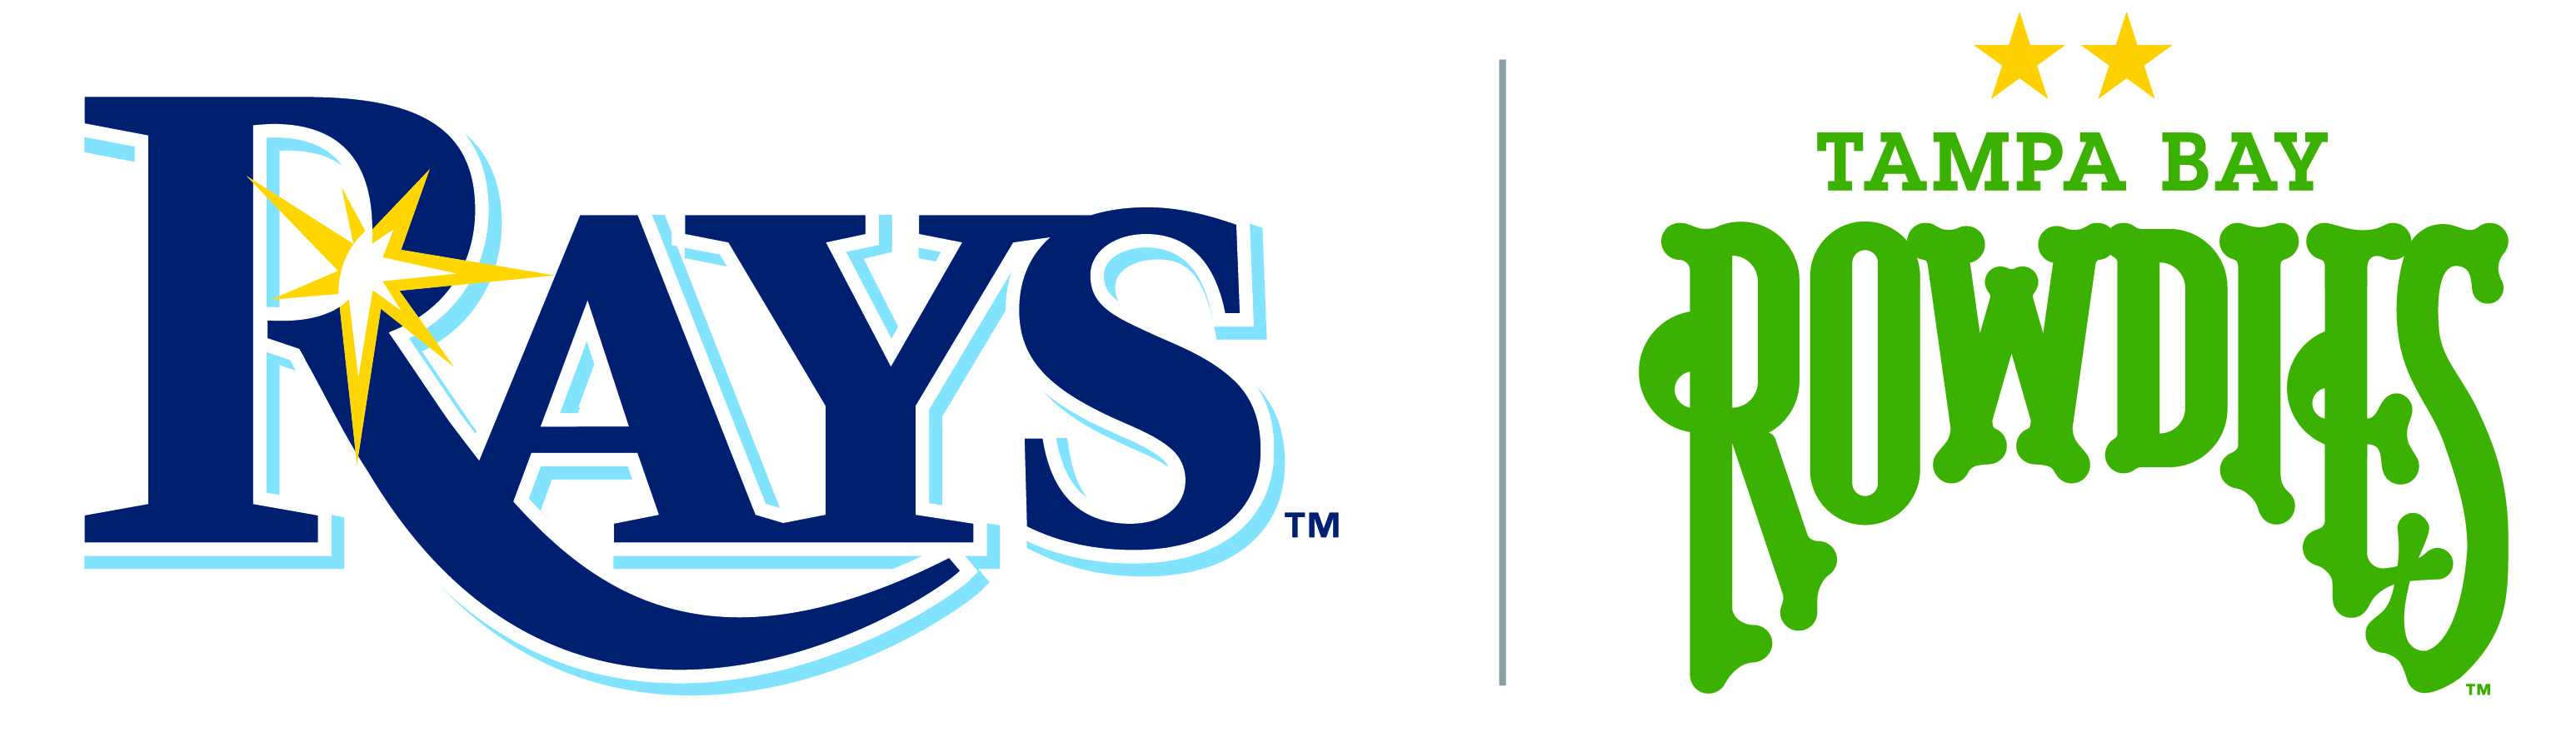 The Tampa Bay Rays & Rowdies